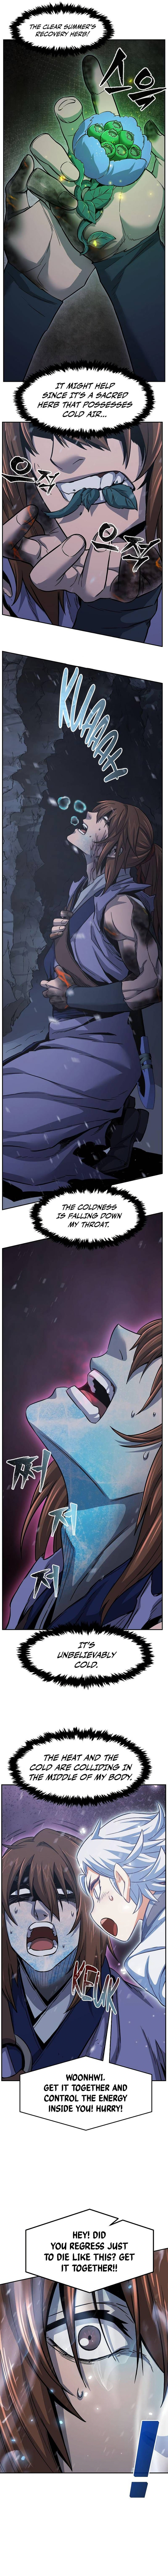 Absolute Sword Sense Chapter 24 page 14